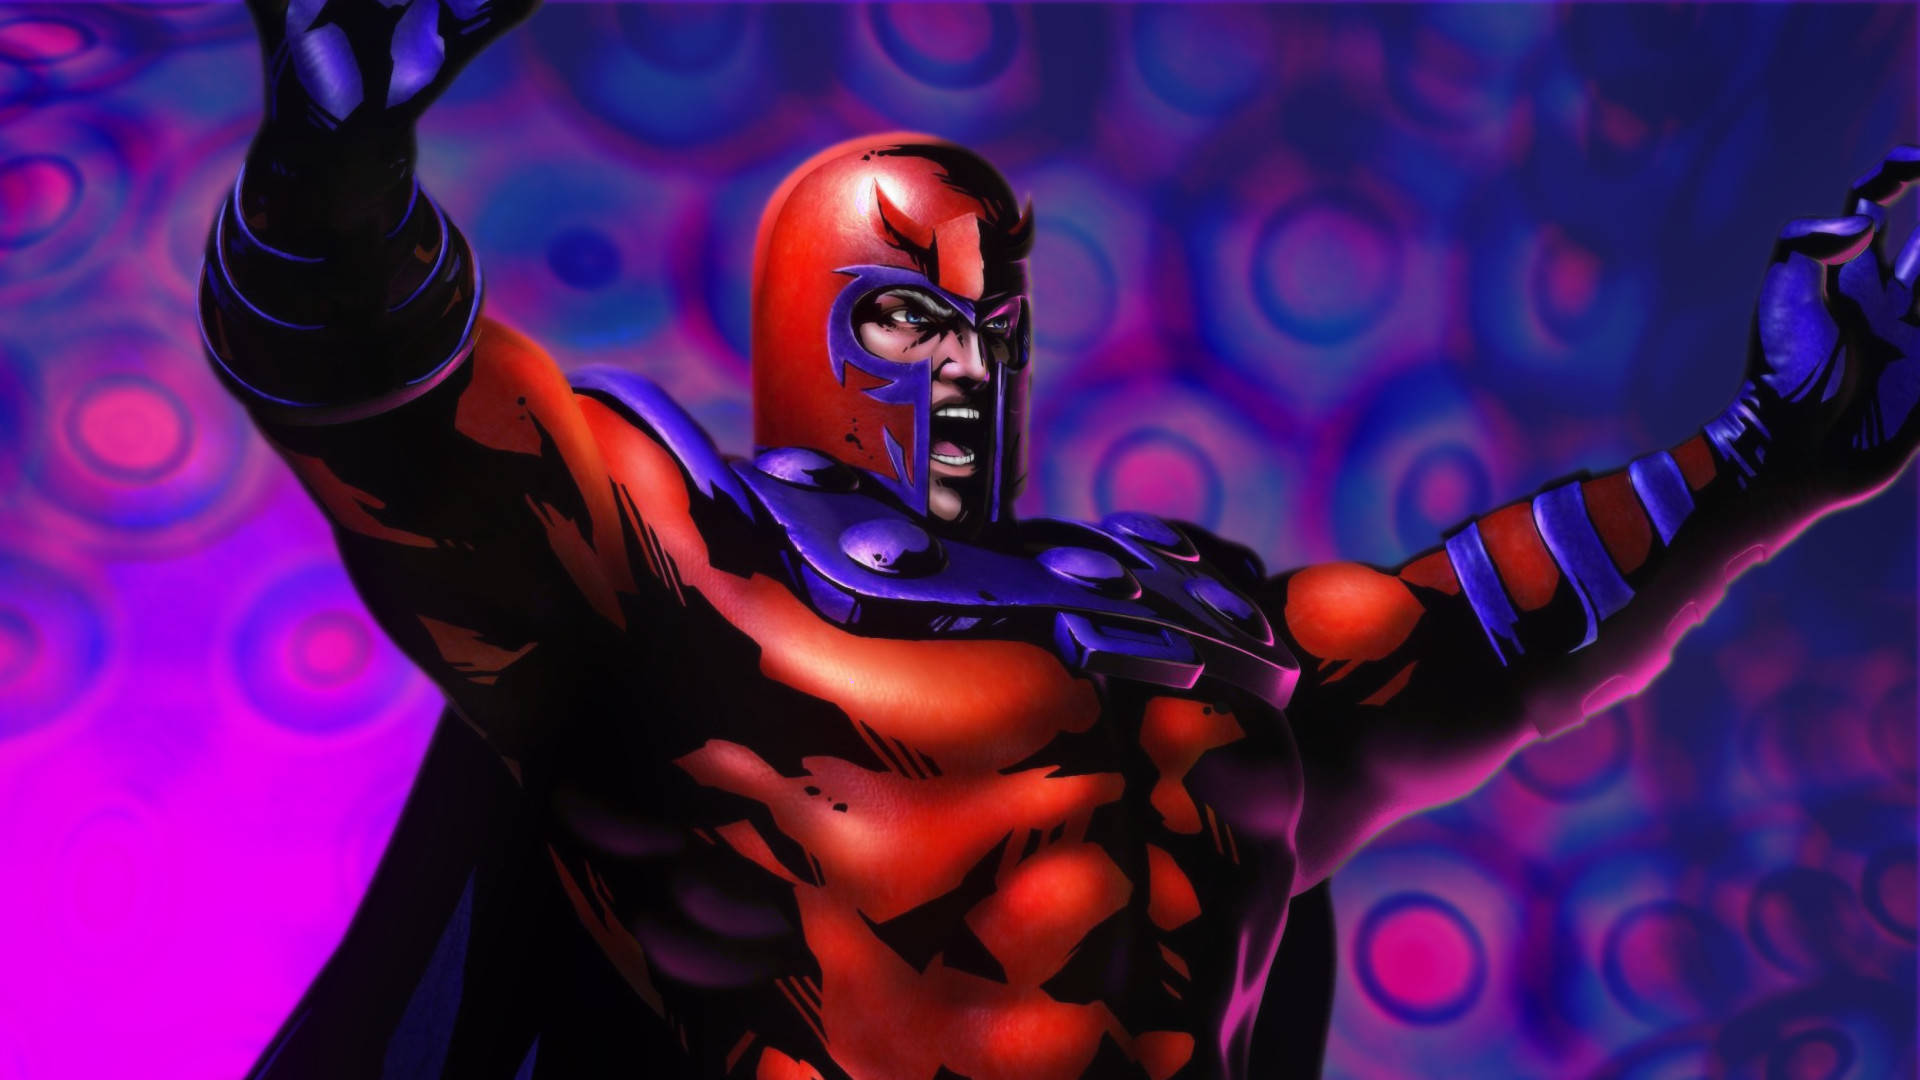 Magneto Engulfed in Blue Energy Circles Wallpaper